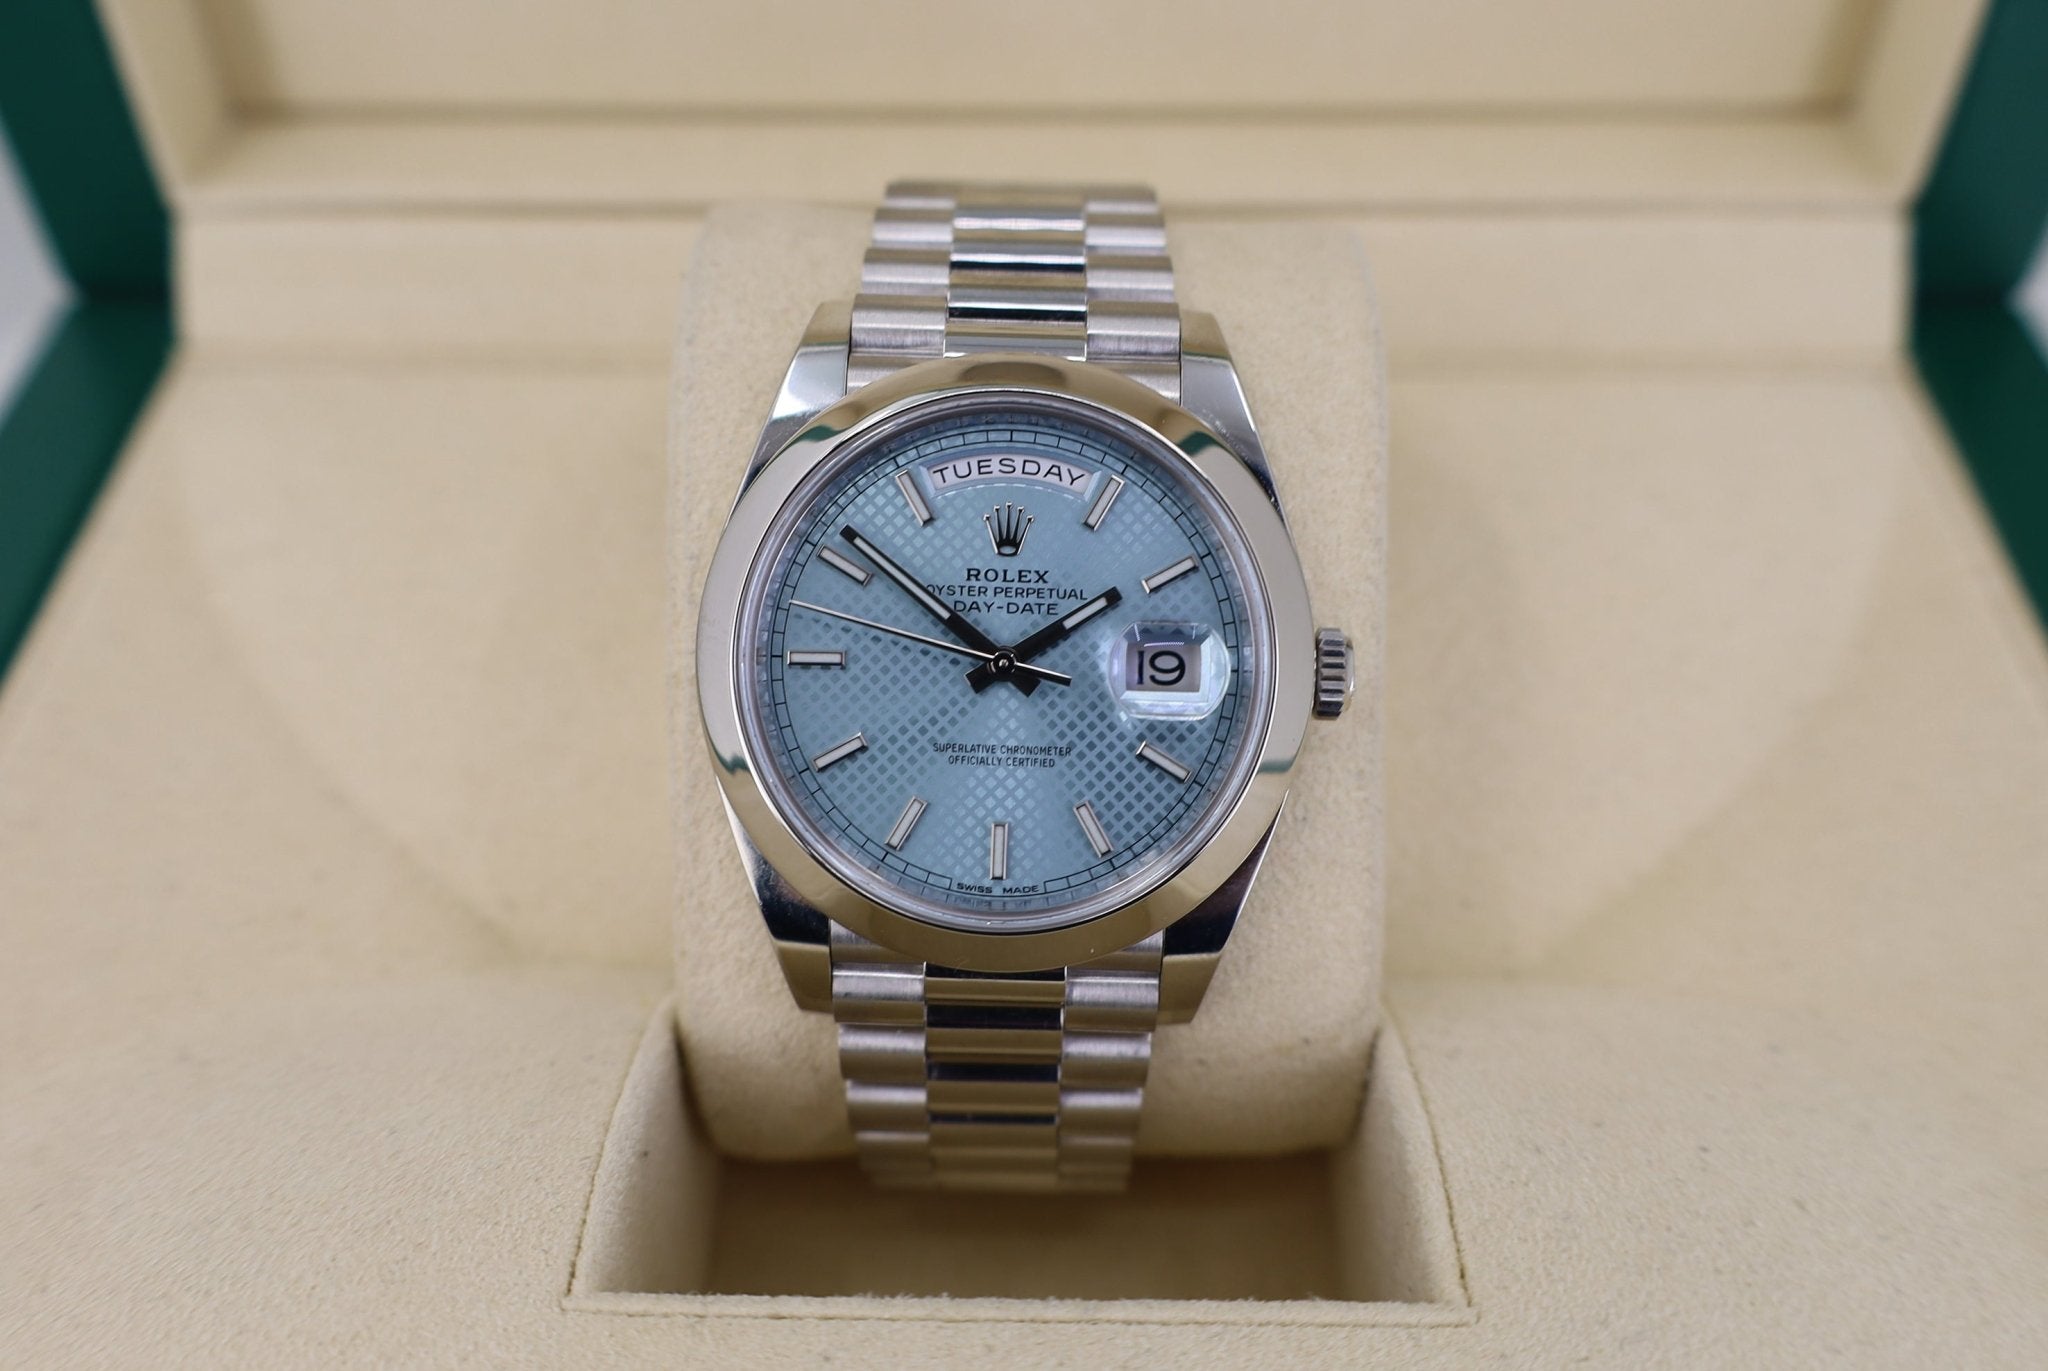 Favorite Ice Blue dial watches?